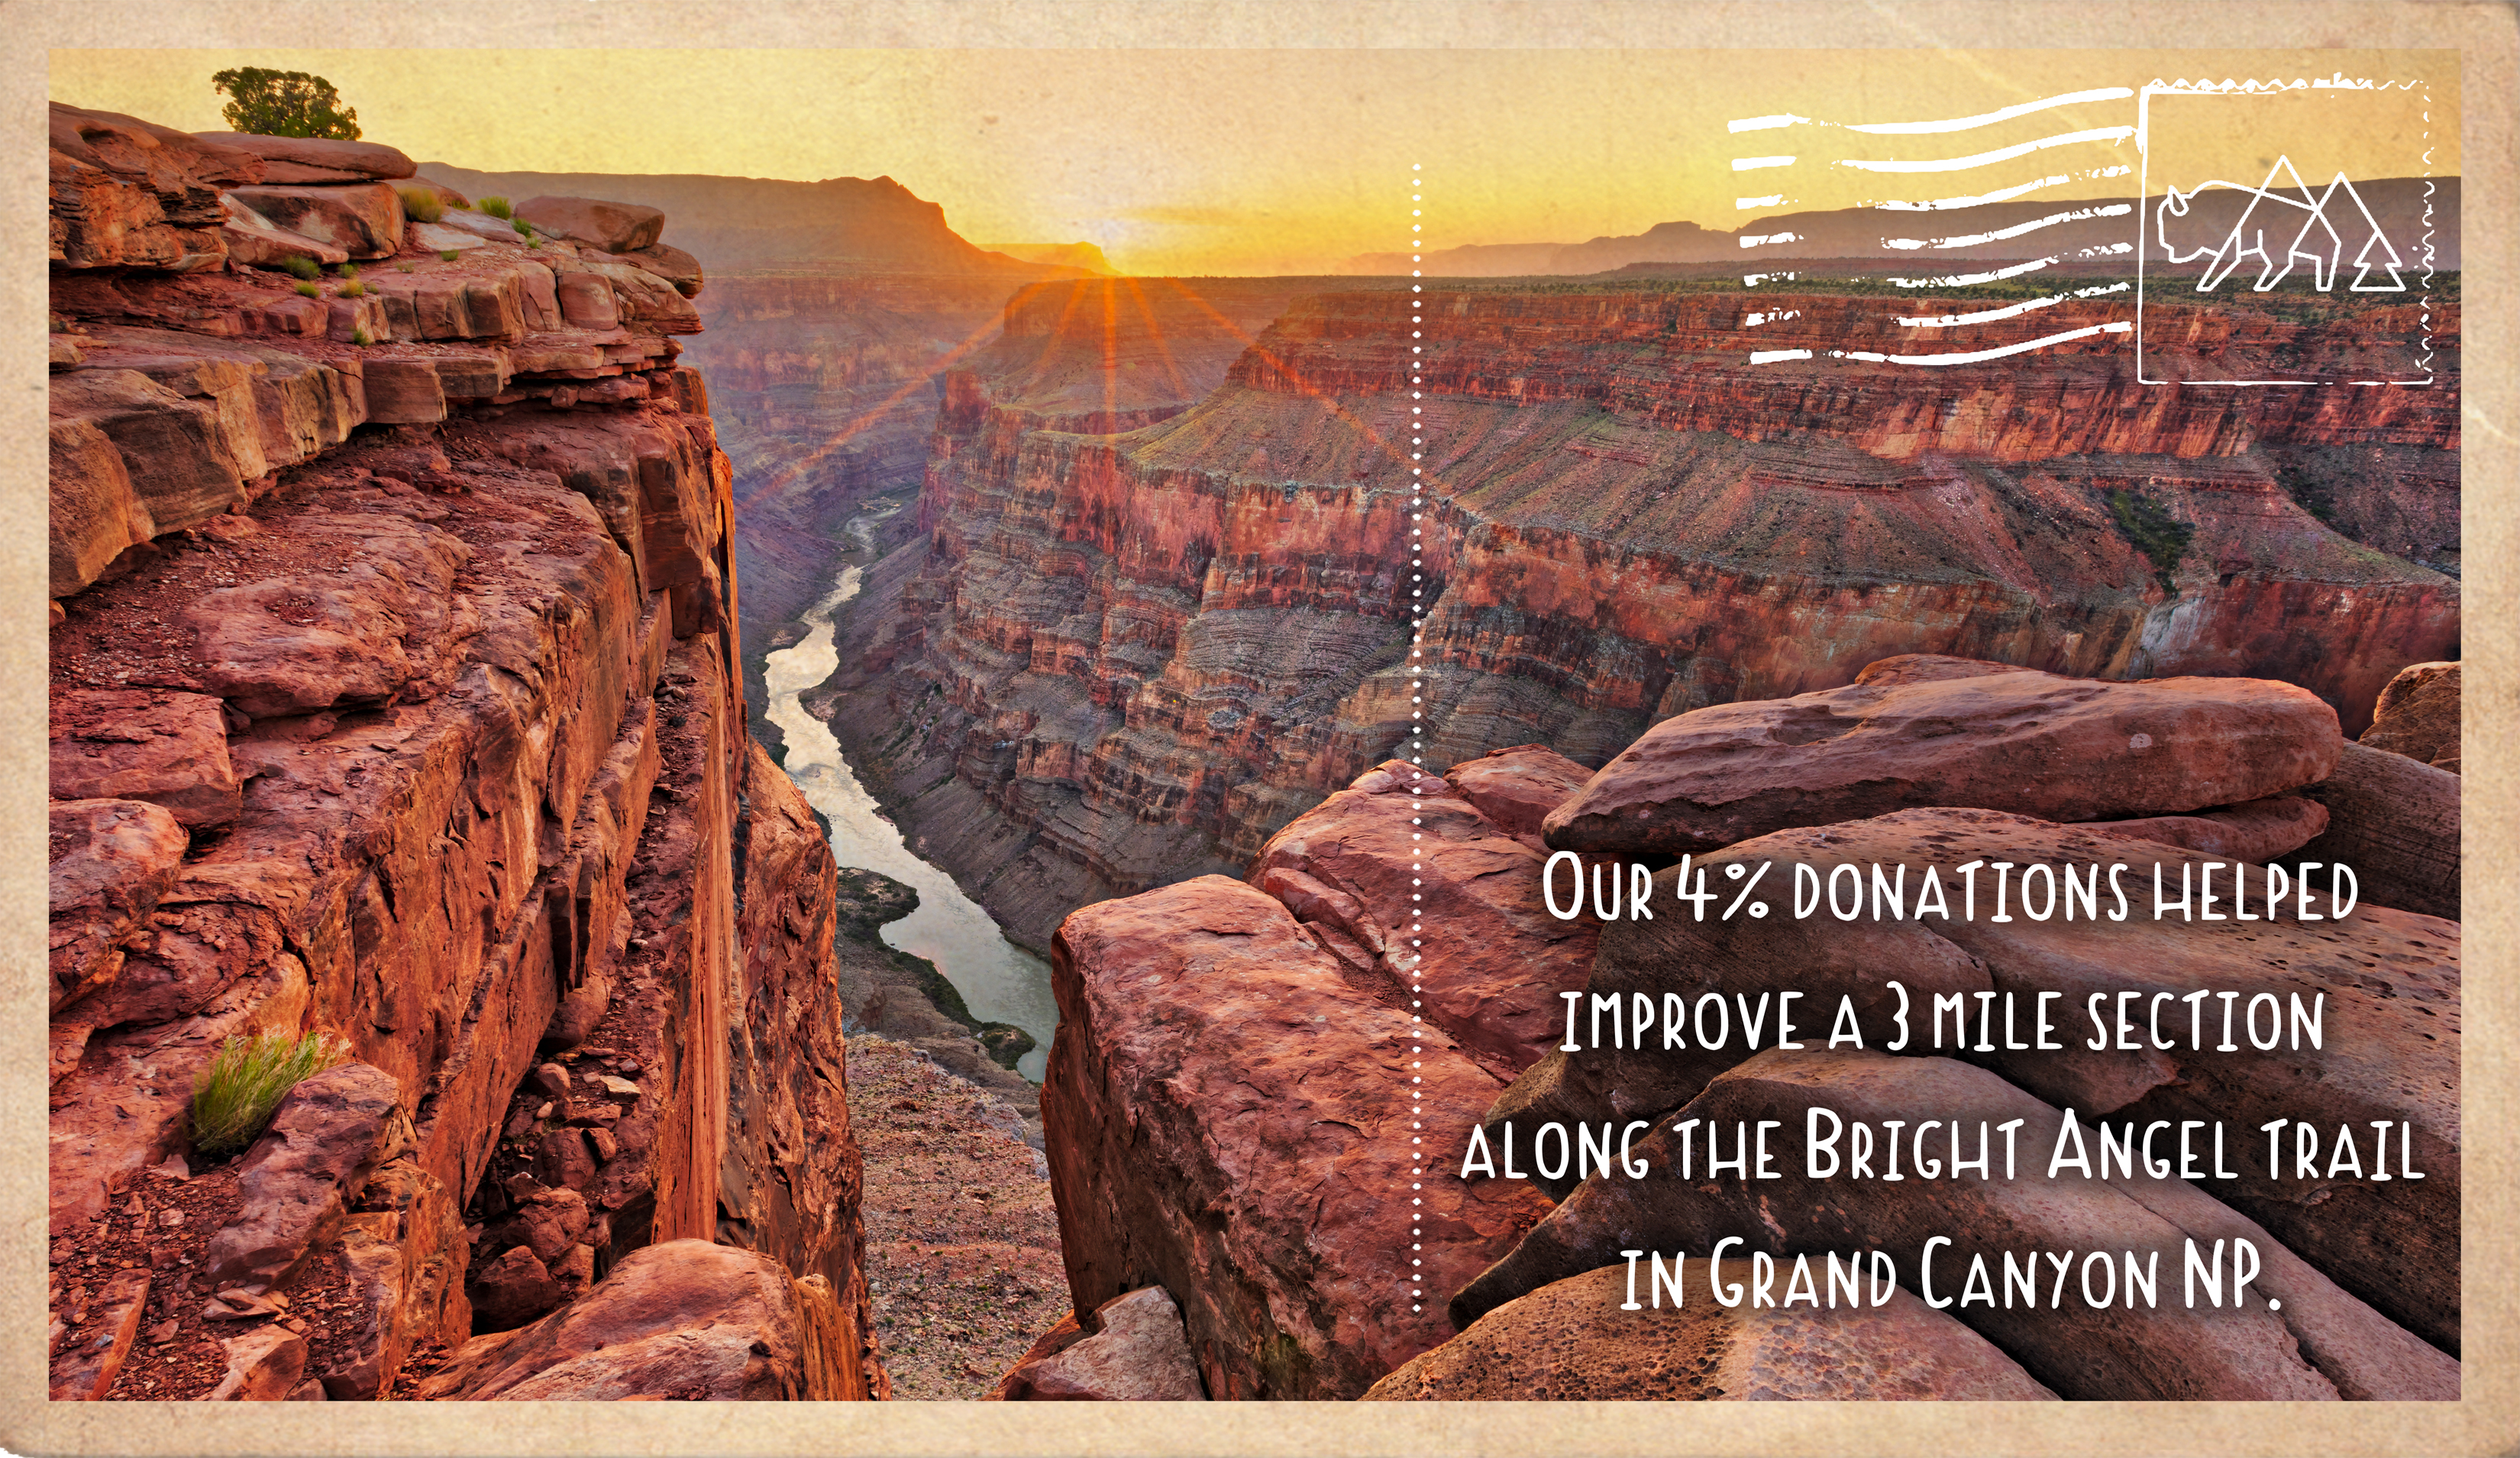 Helped Improve the Bright Angel Trail in Grand Canyon NP